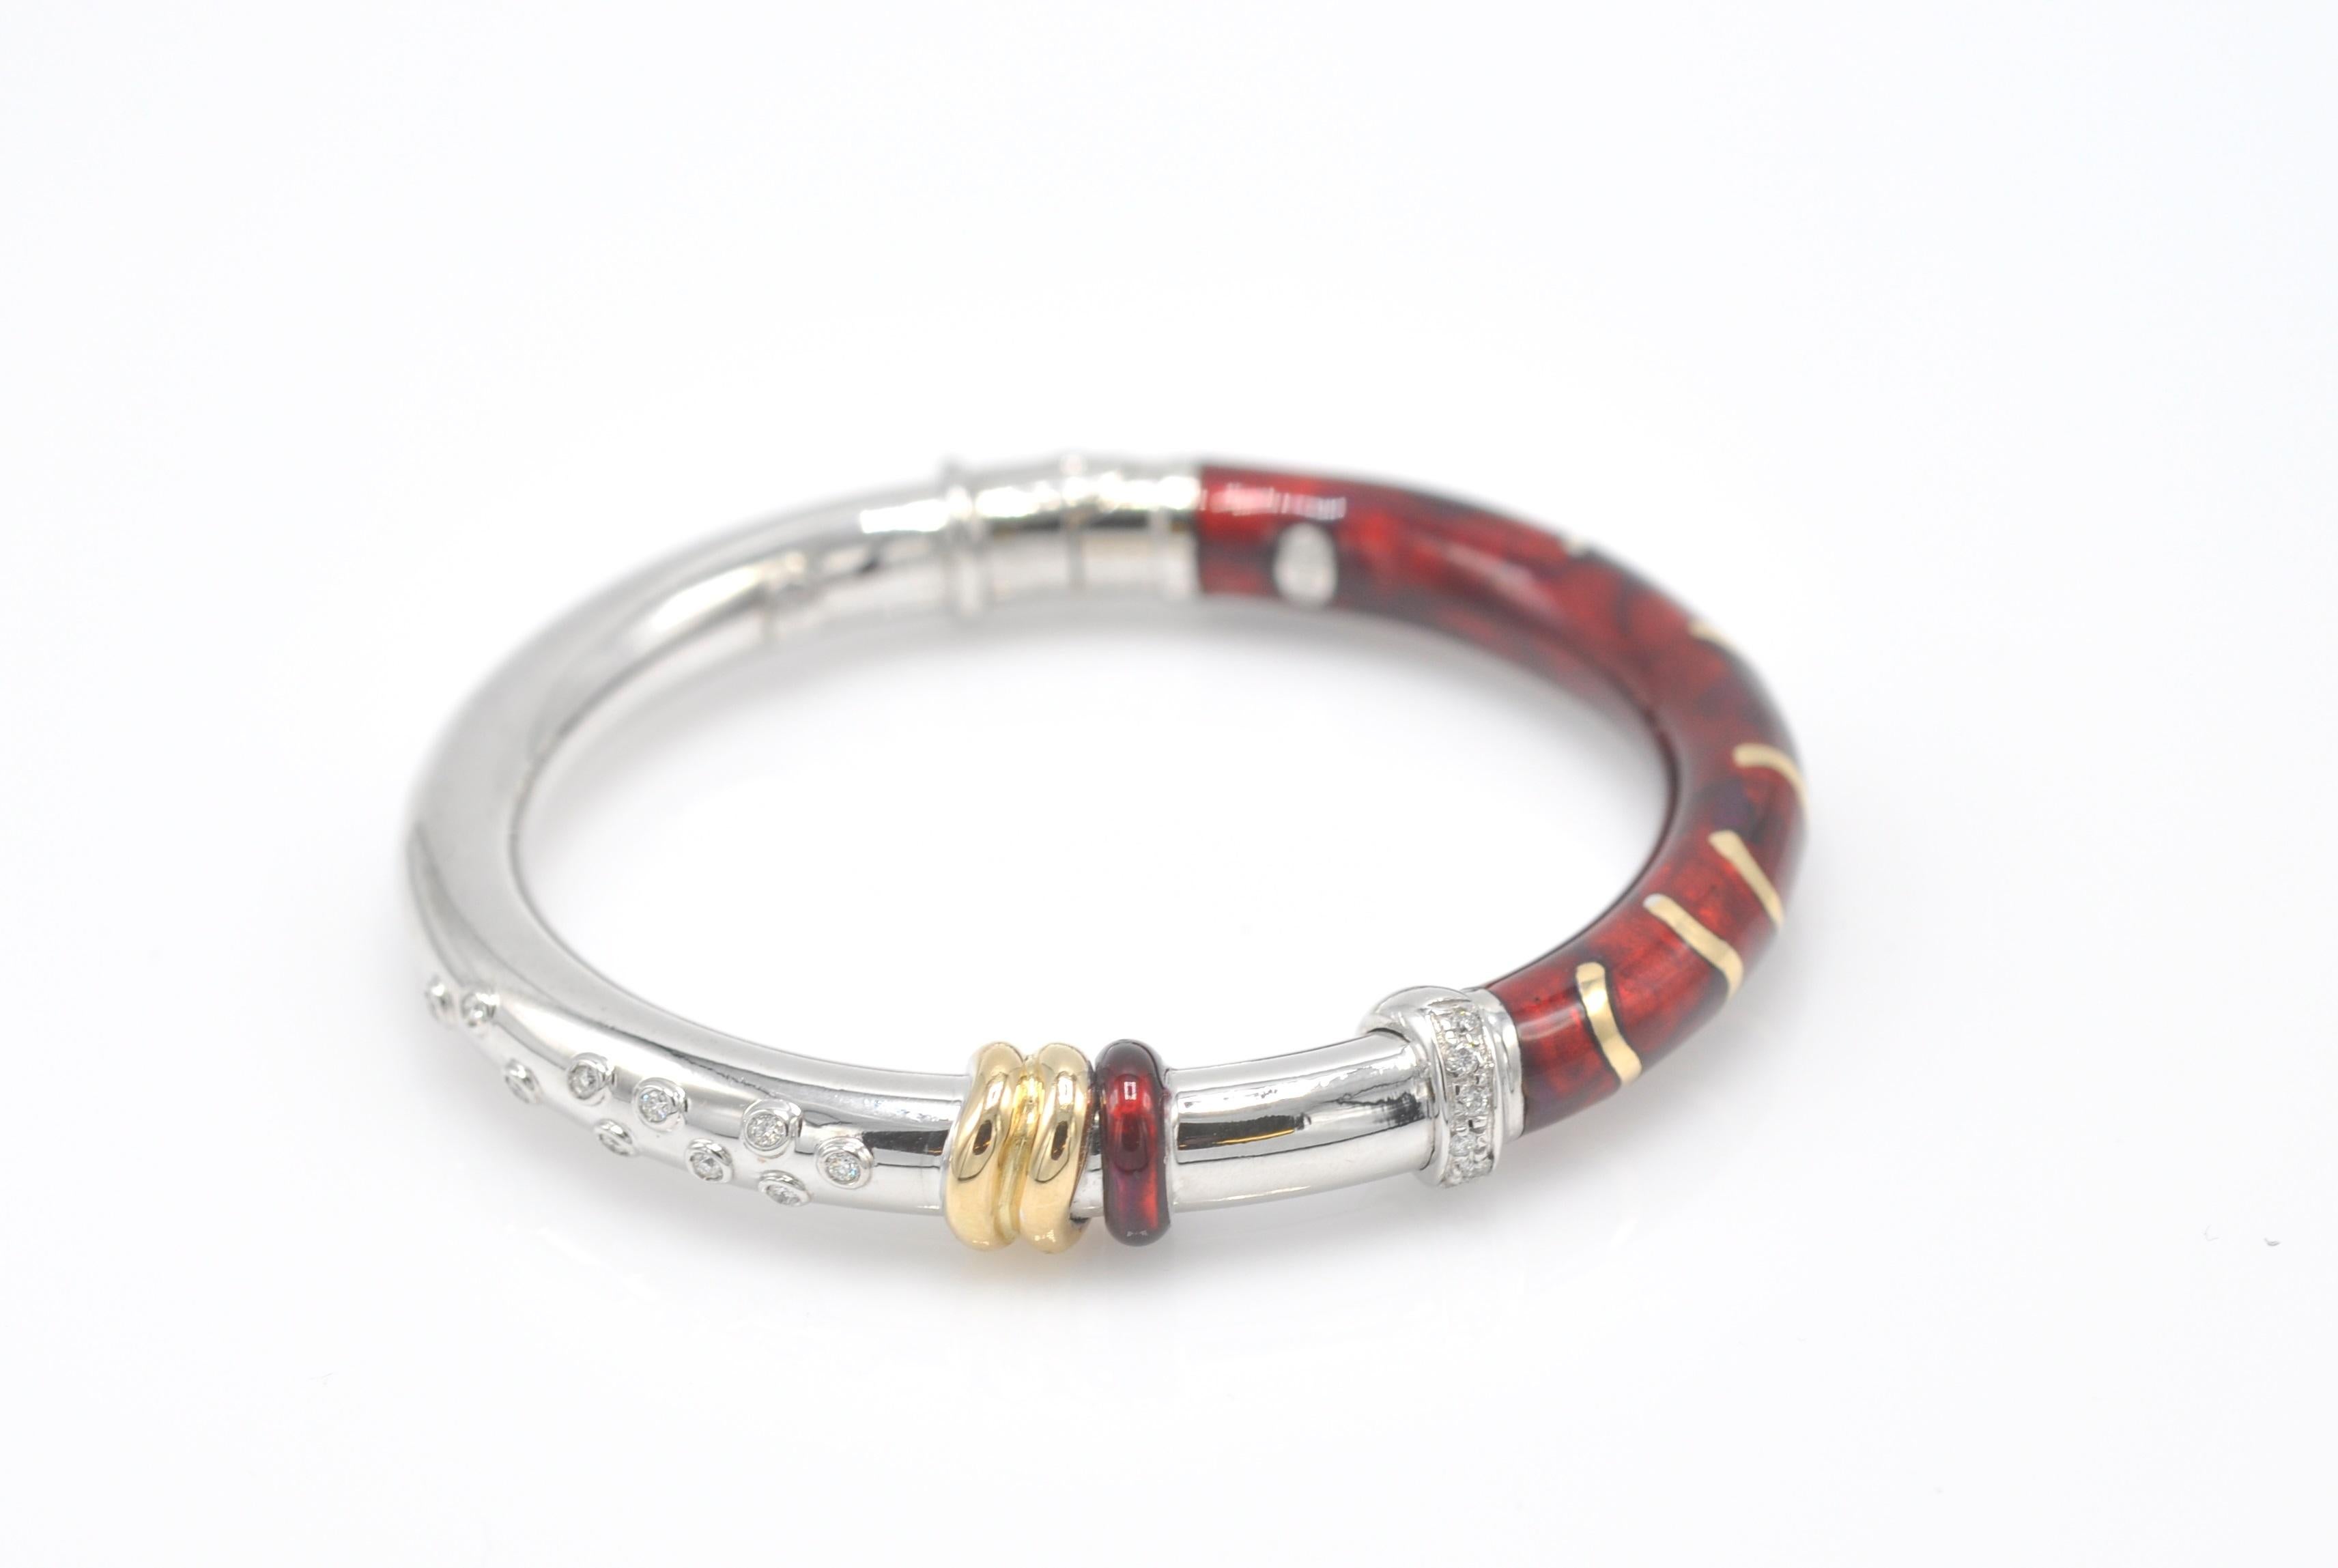 Vintage 18K White Gold, Red Enamel Bangle Bracelet with Yellow Gold Accent Bands and 0.30CTW Round Diamonds. This bracelet, designed and manufactured by SOHO in Italy, wears easily alone or in a group with other bangles. This item is stamped SOHO,